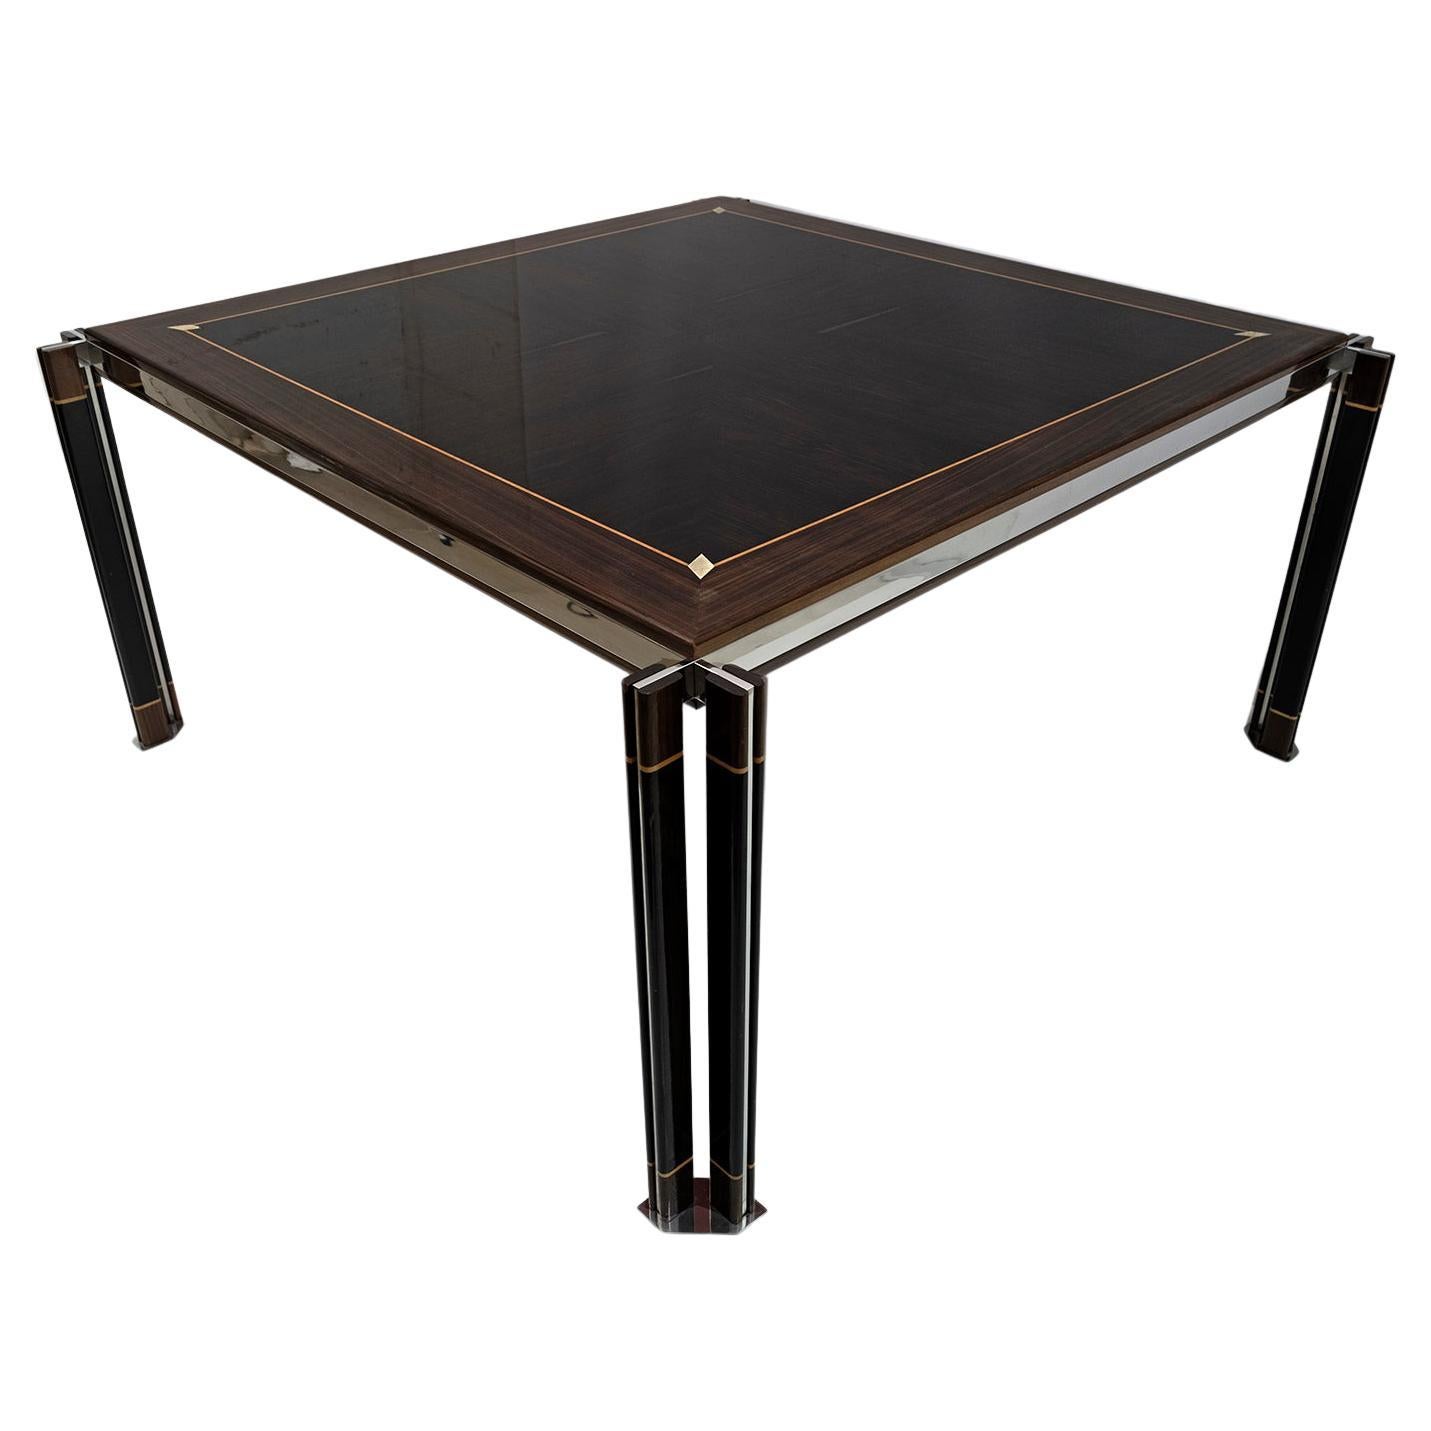 Paolo Barracchia Italian Steel and Inlaid Wood Dinning Table by Roman Deco, 1978 For Sale